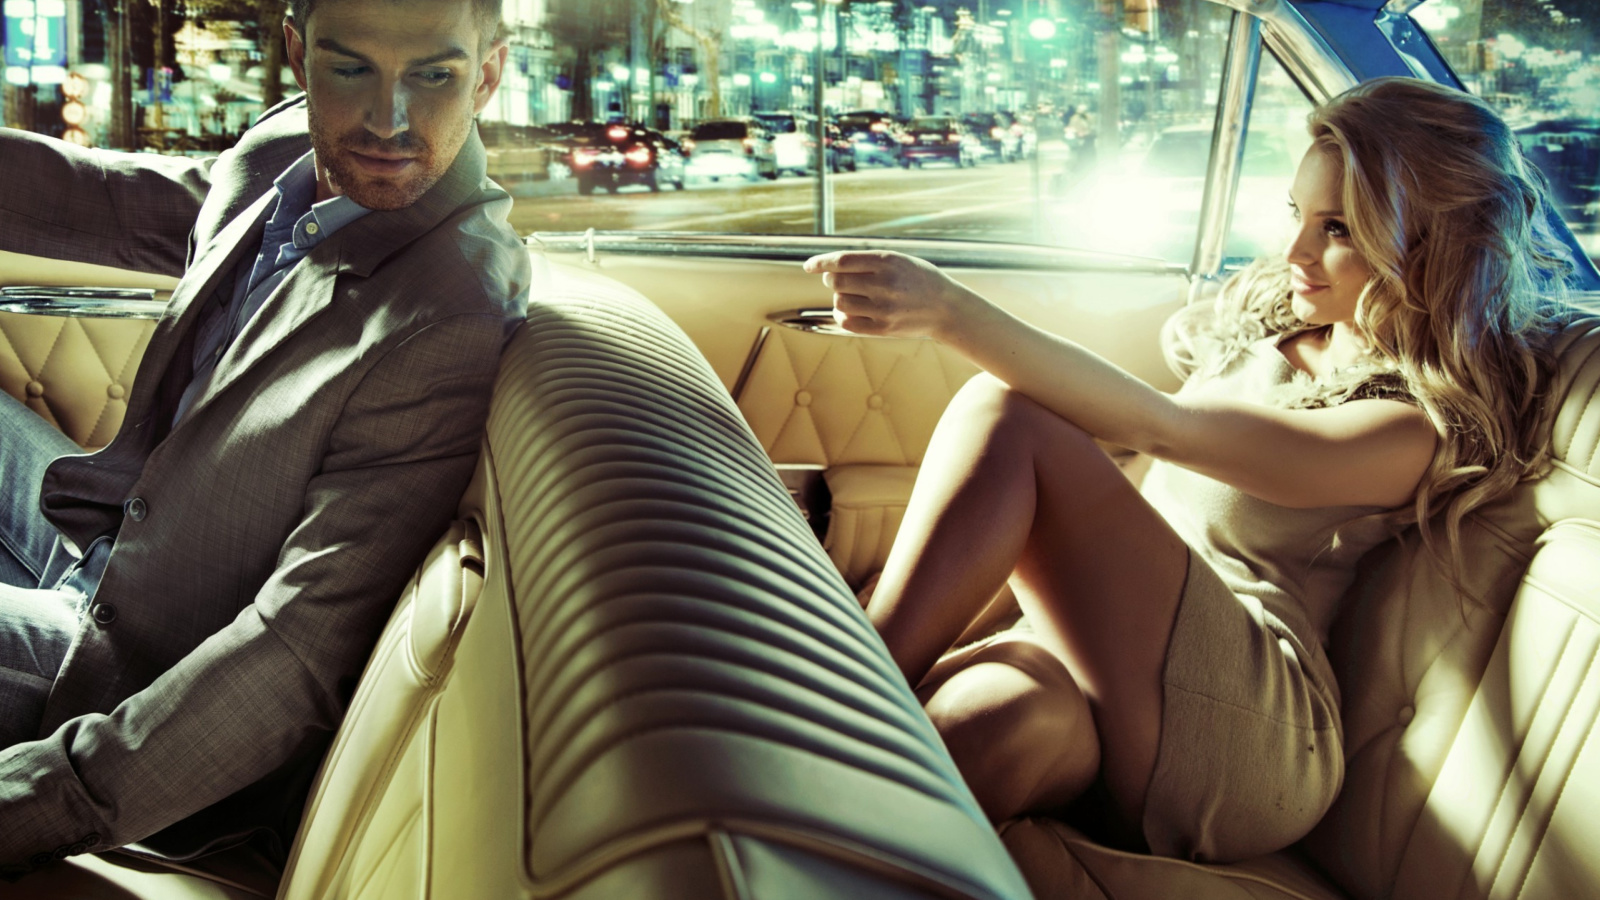 Luxury personal driver wallpaper 1600x900